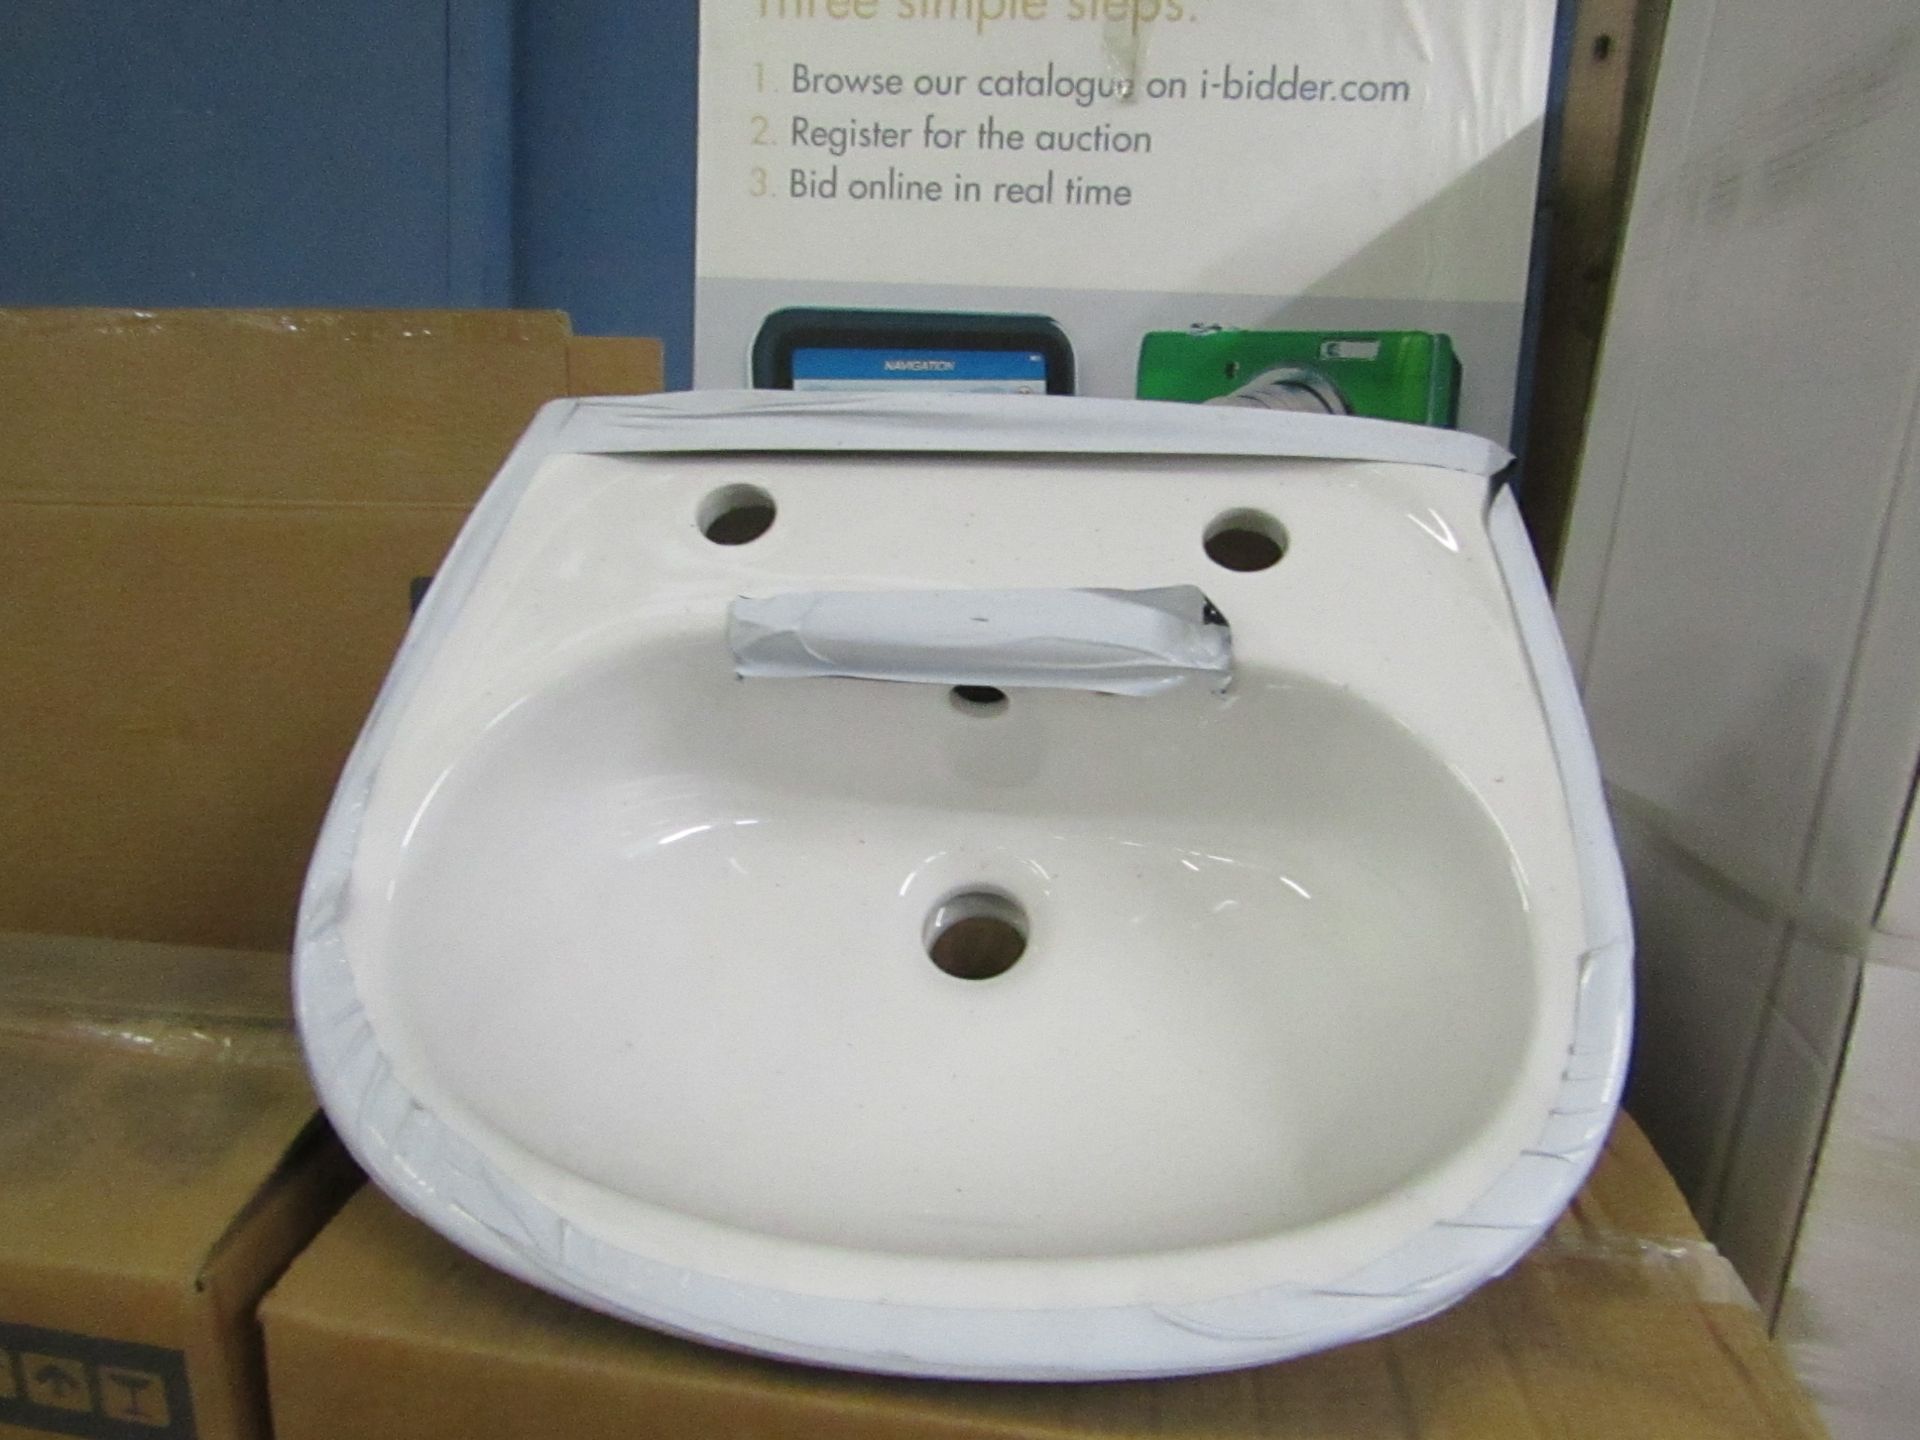 Vitra Oxford 2TH cloakroom basins, all new and boxed.